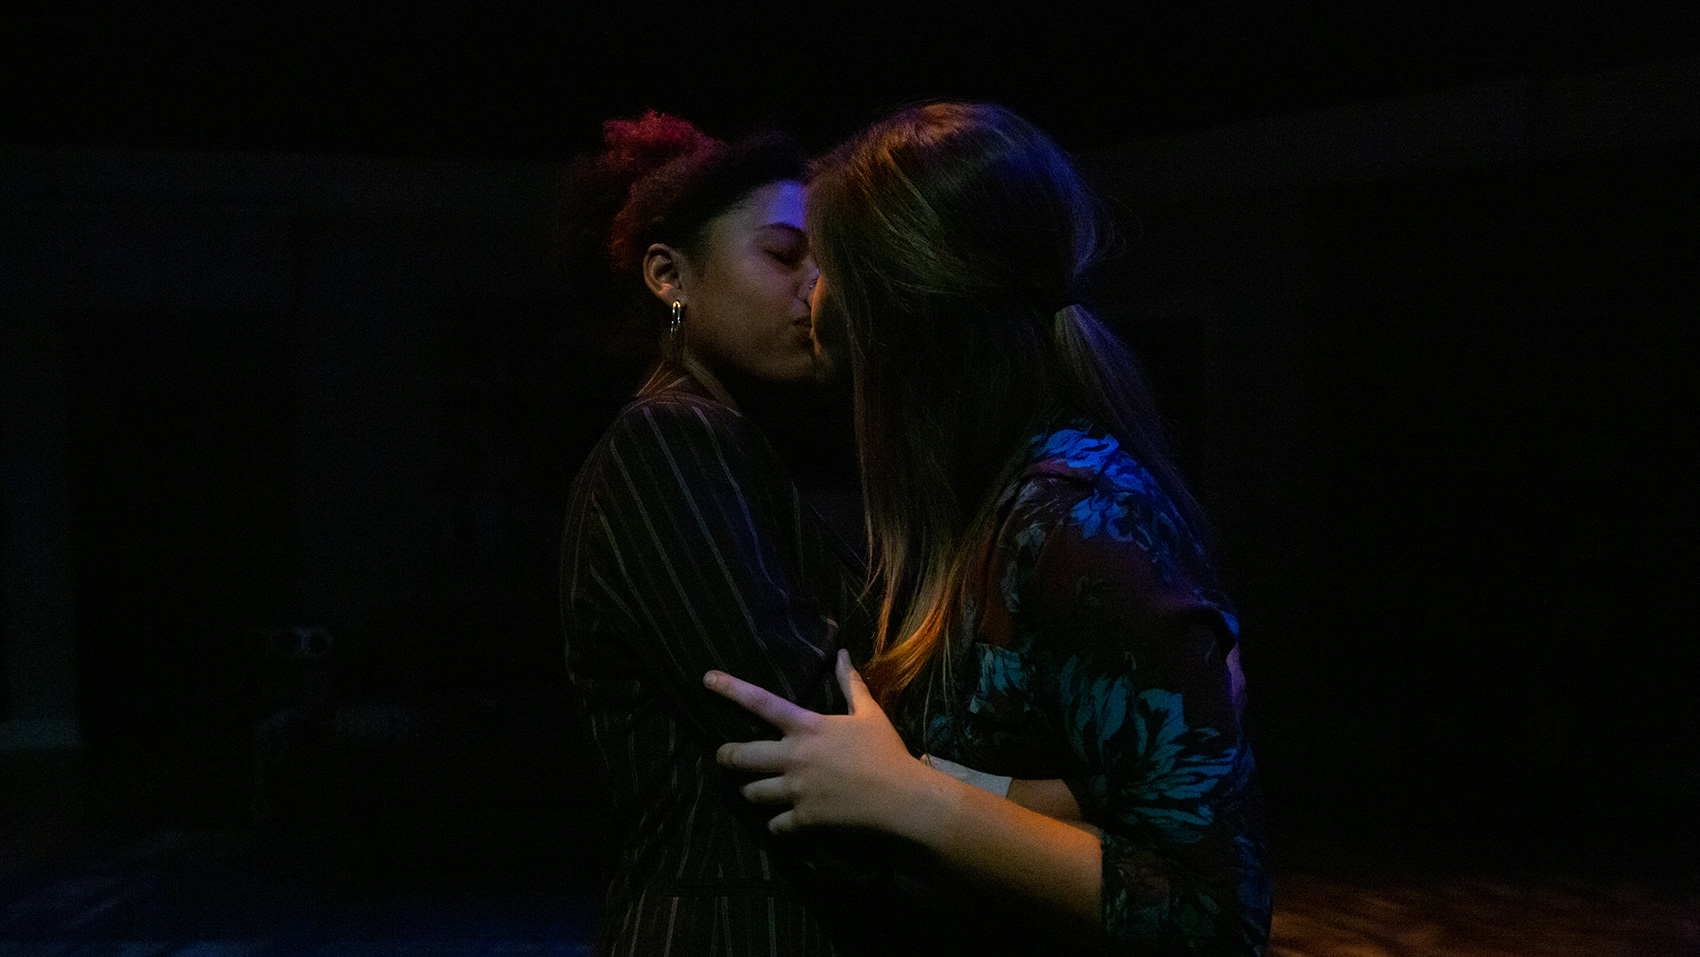 The two main women characters of Stop Kiss embrace each other as they kiss.